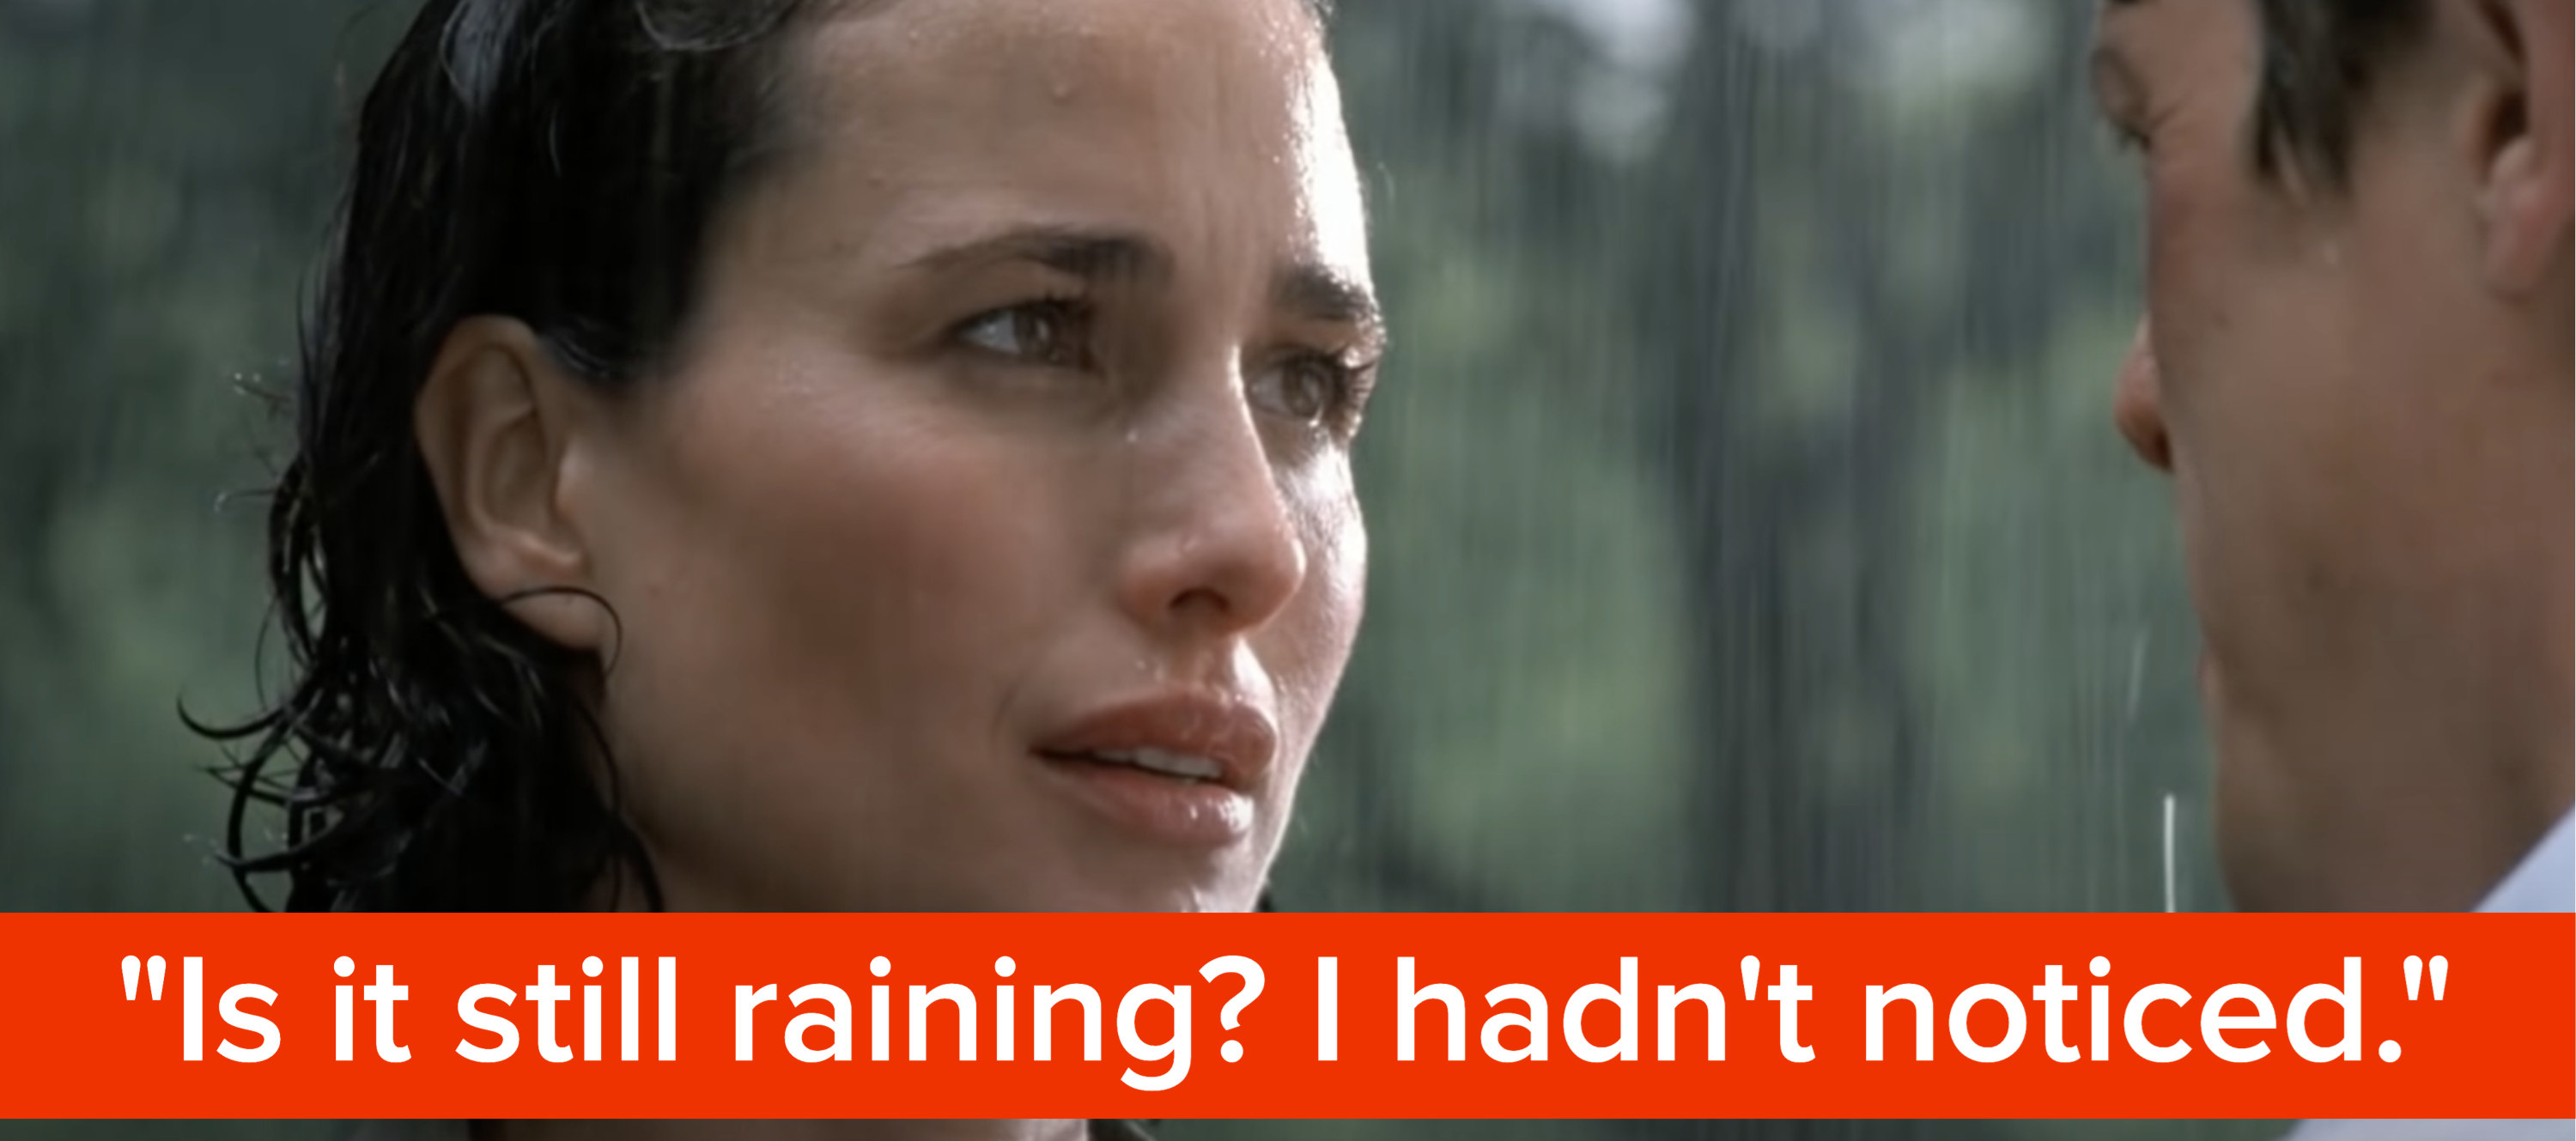 a woman asks &quot;is it still raining, I hadn&#x27;t noticed&quot; while it rains